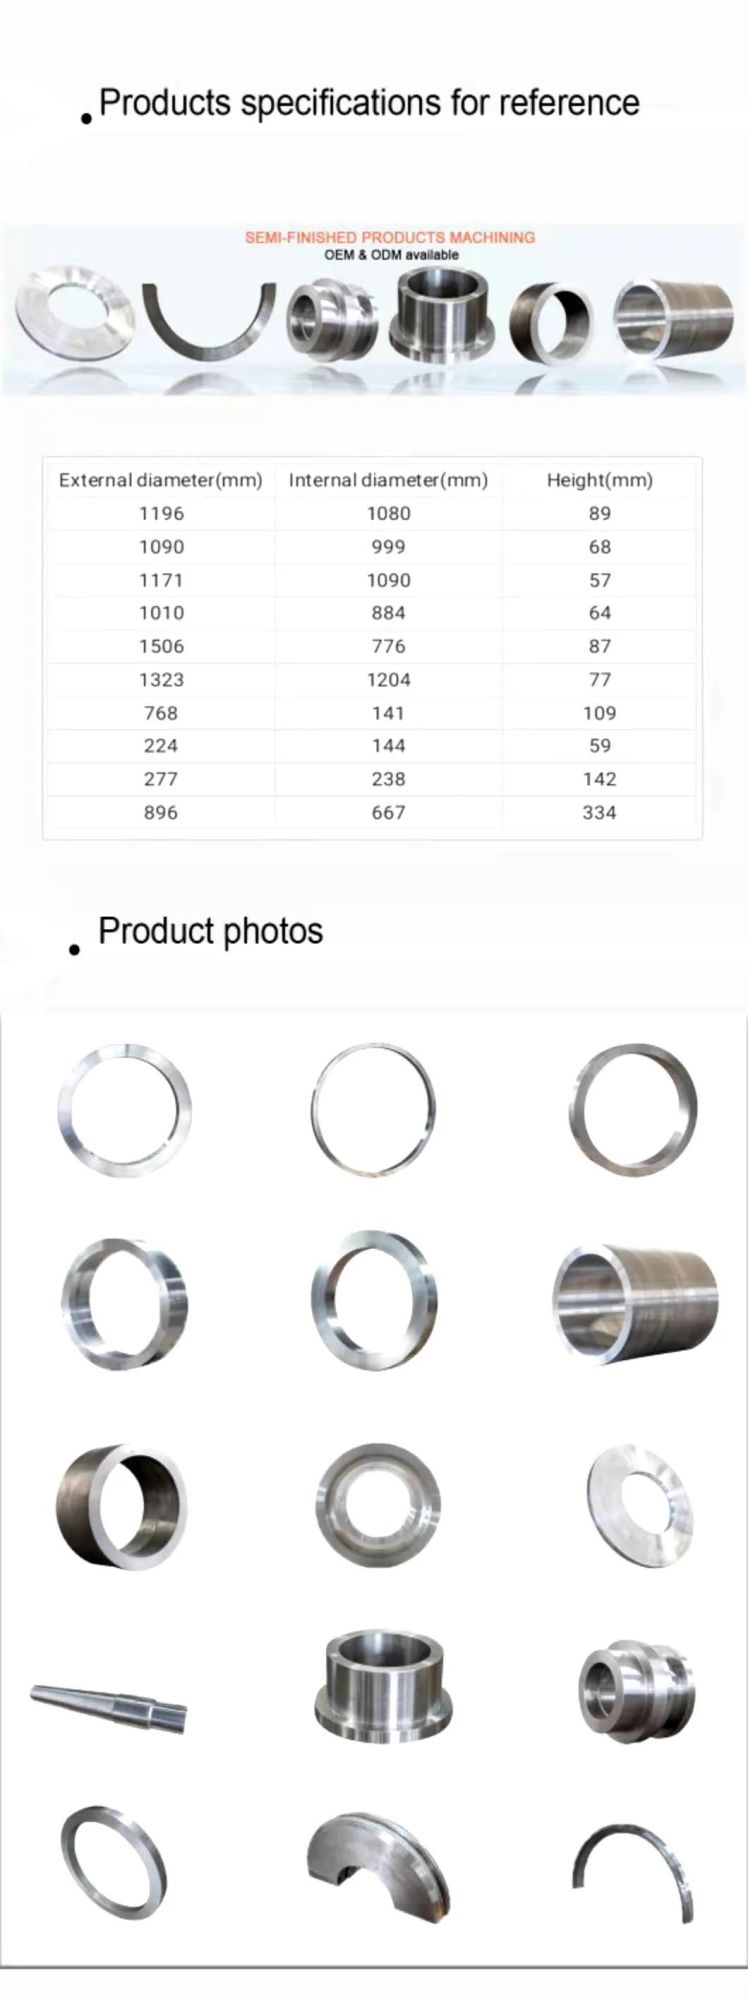 Petroleum / Chemical Industry Equipment Machinery Parts Processing Shaft